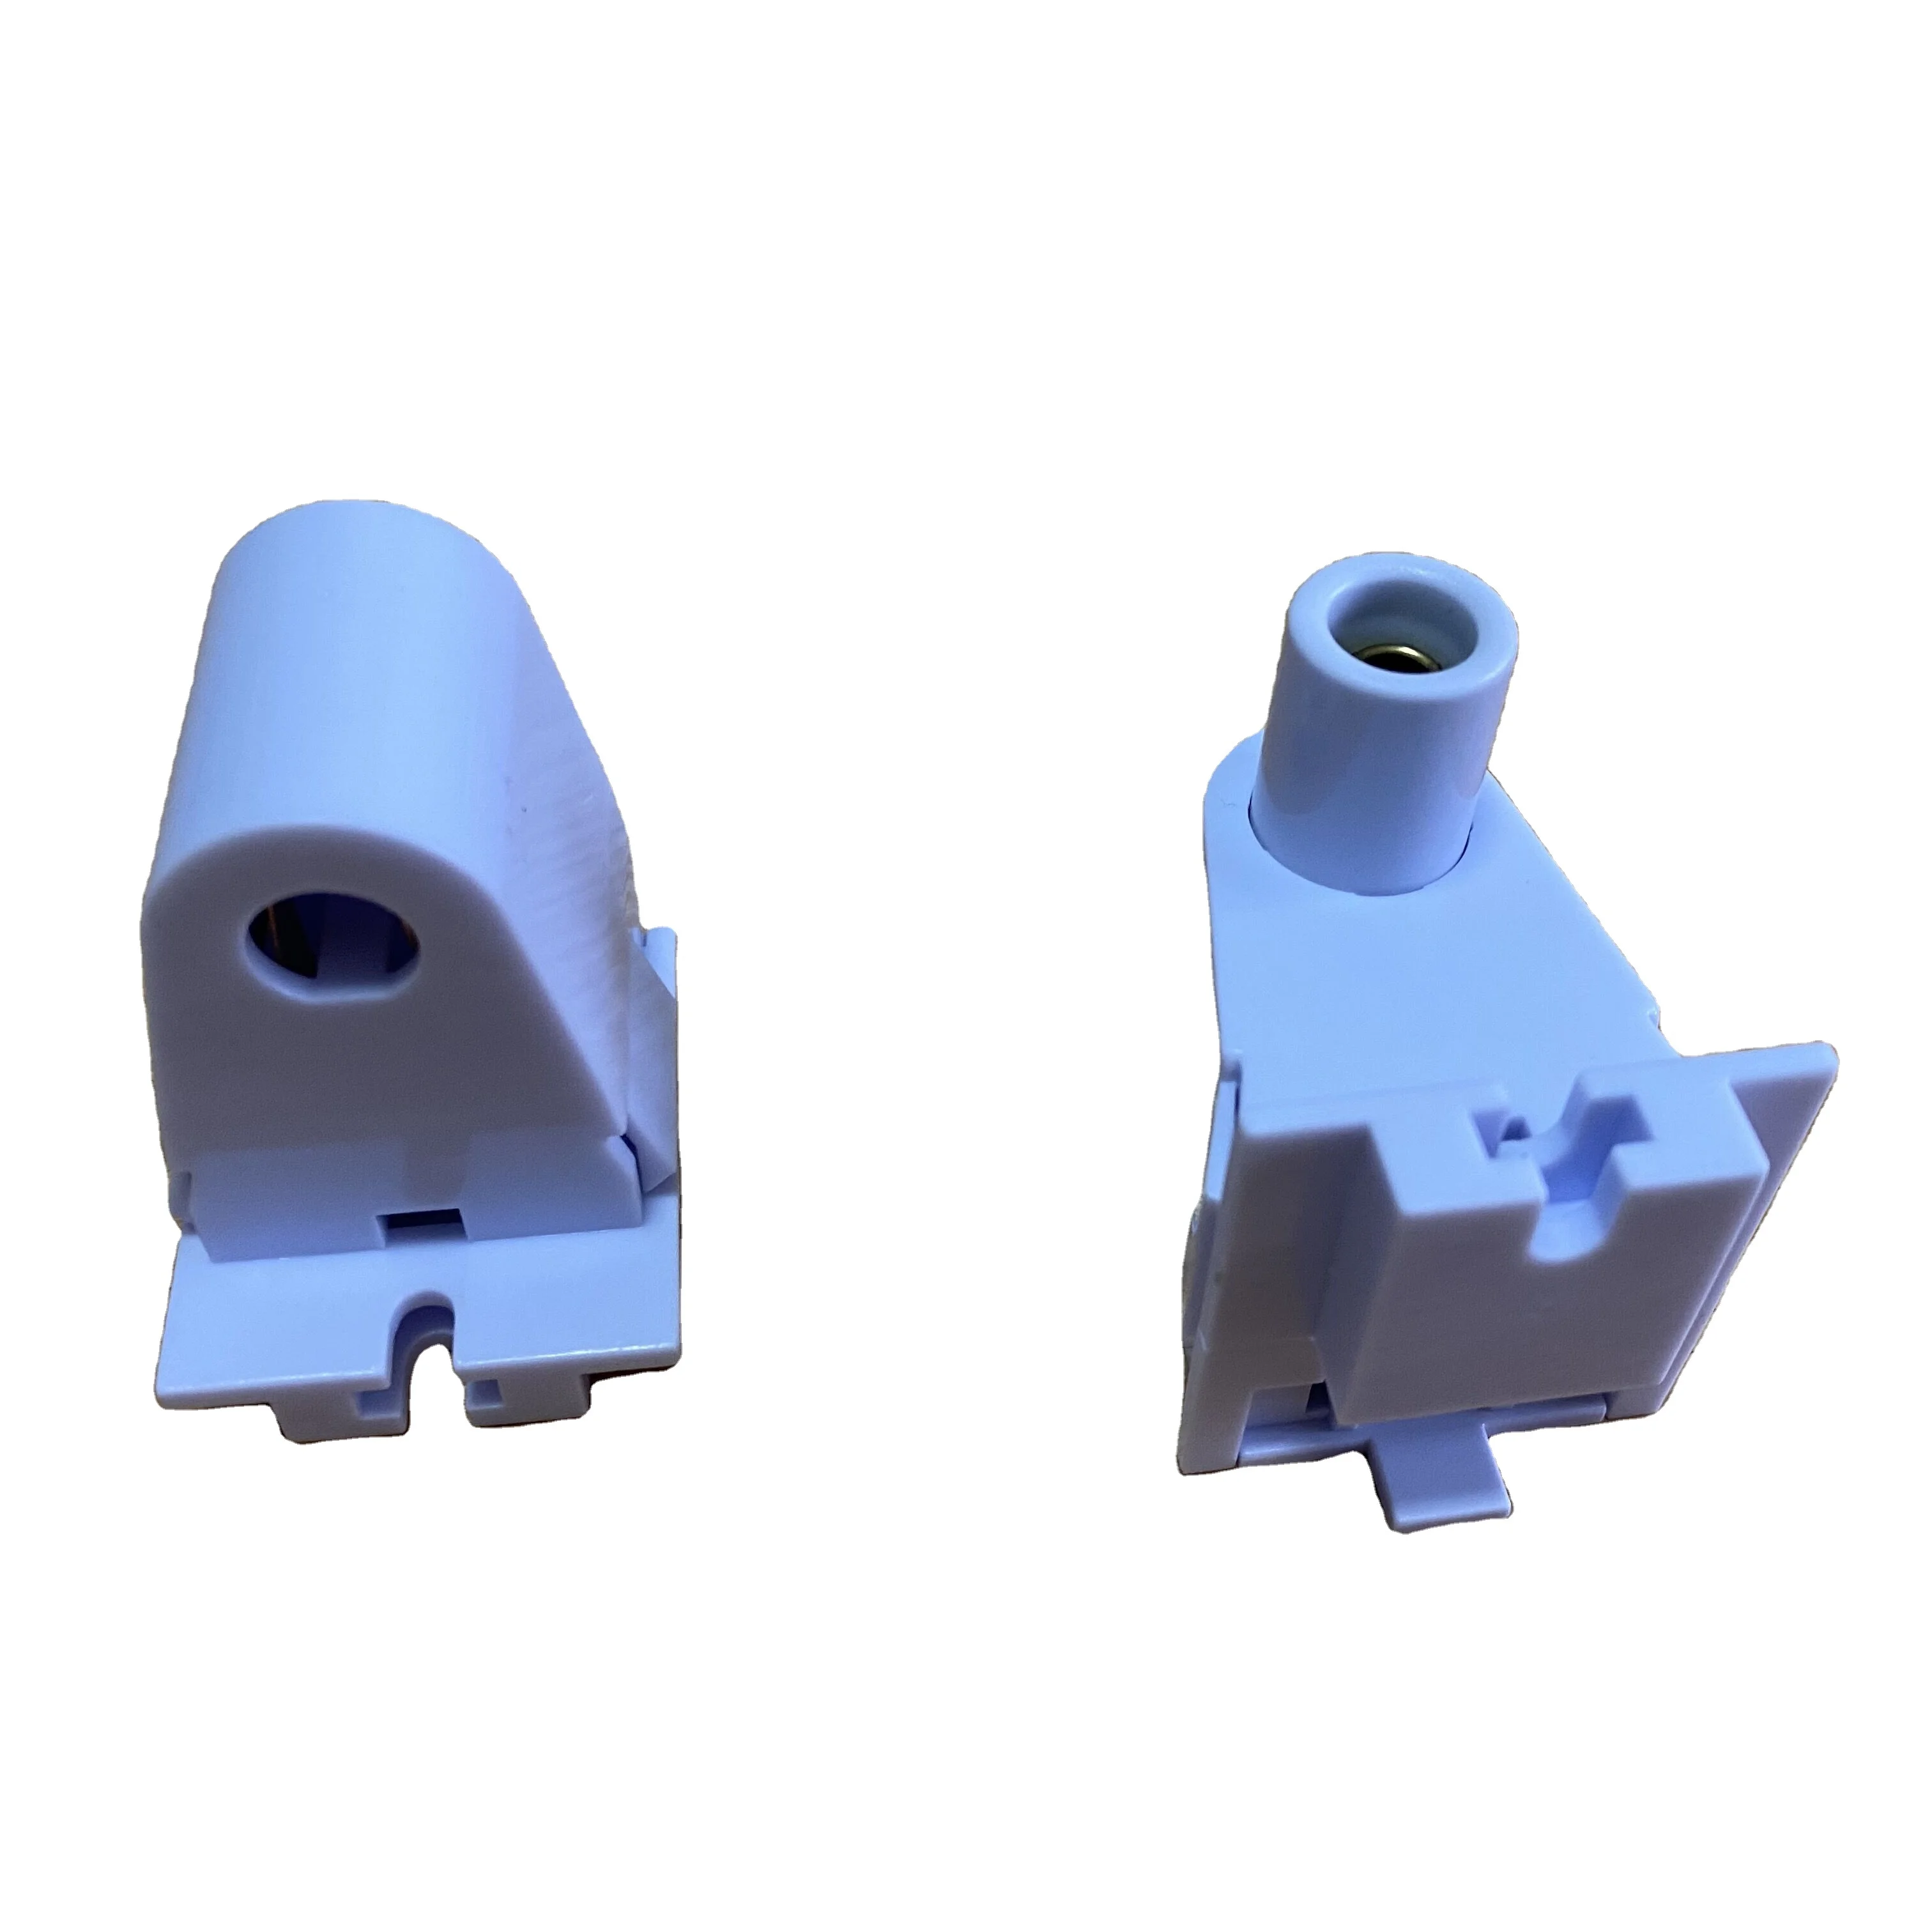 Base Holder Socket Connector with T8 Single Pin FA8 8ft LED Bulb Light Replacement Fluorescent Plunger